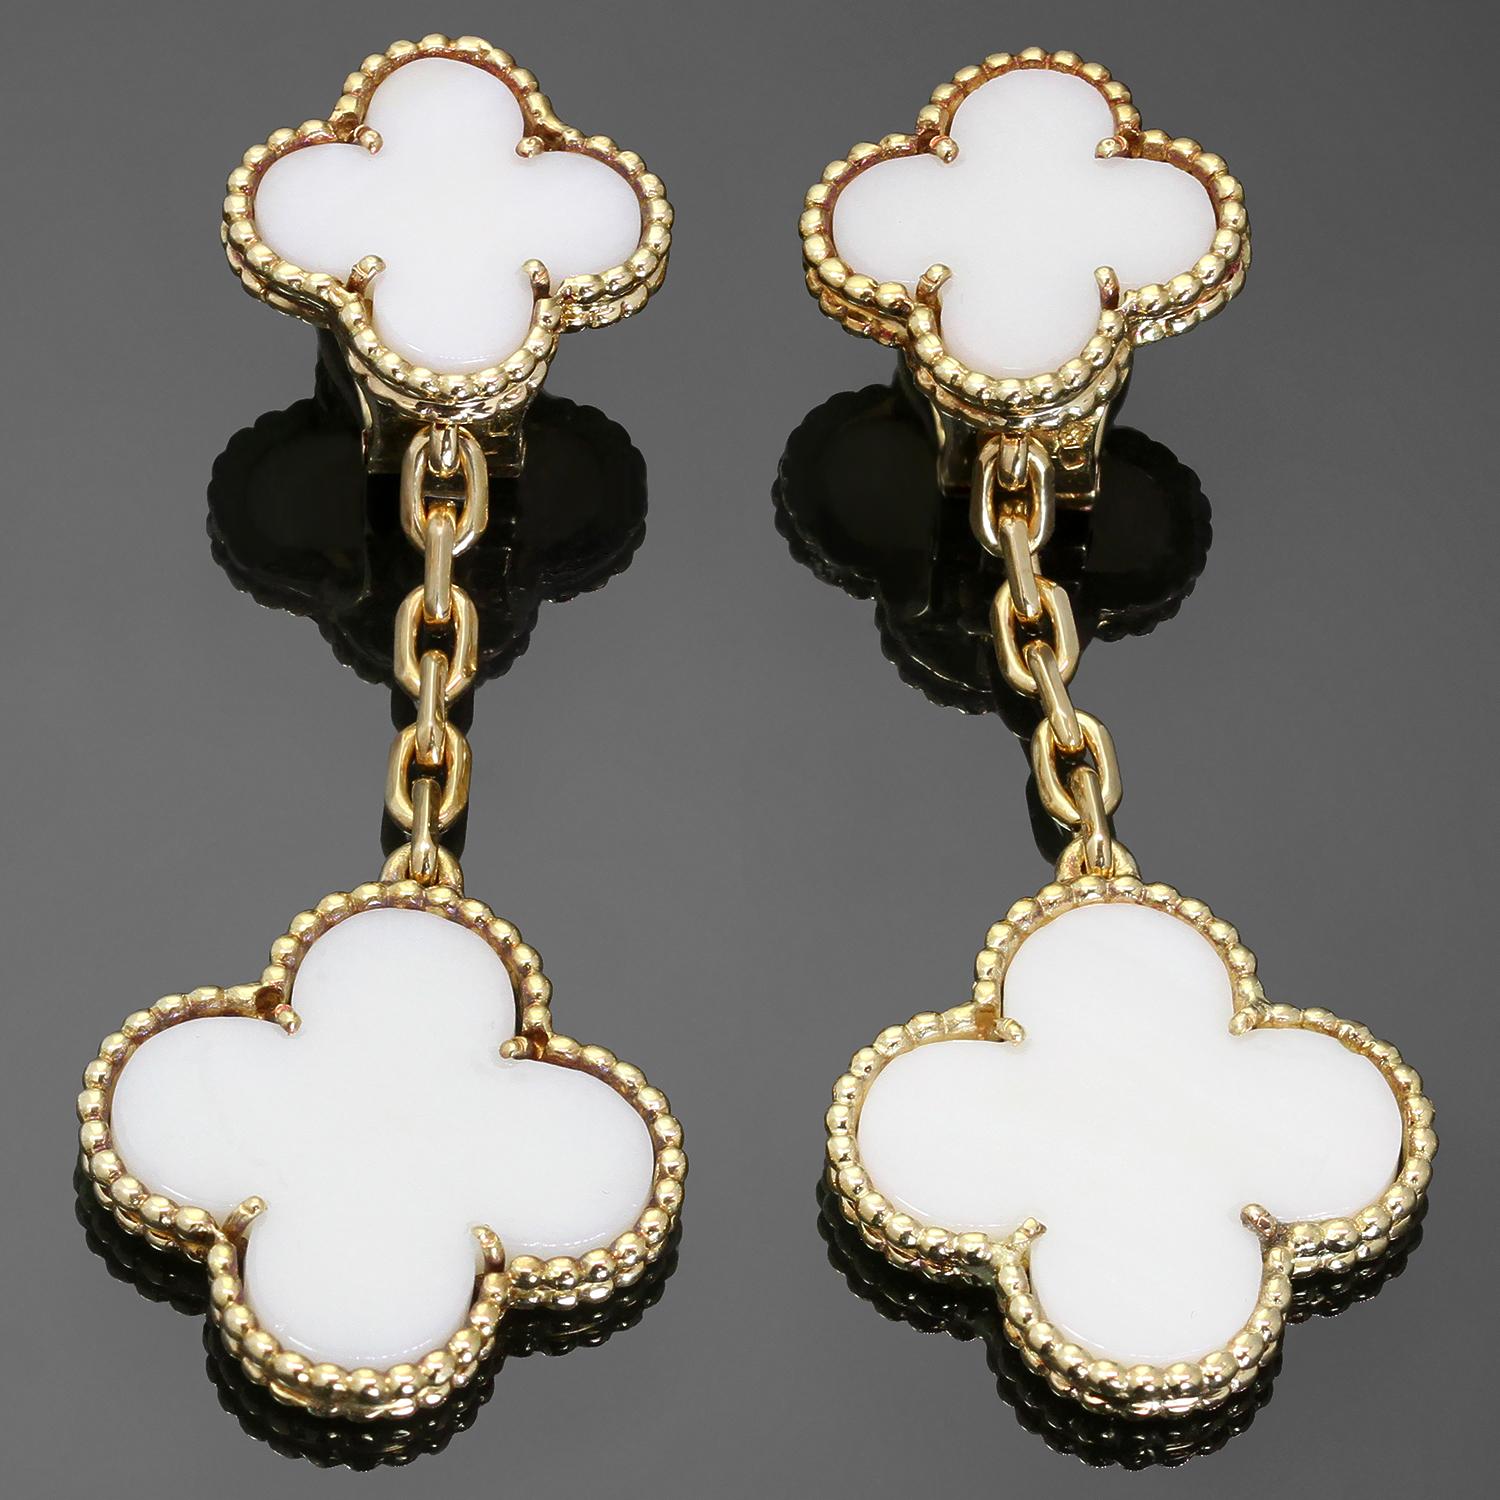 These elegant vintage Van Cleef & Arpels drop earrings from the Magic Alhambra collection are crafted in 18k yellow gold and feature lucky clover motifs inlaid with white corals in round bead settings. Made in France circa 1970s. Measurements: 0.78